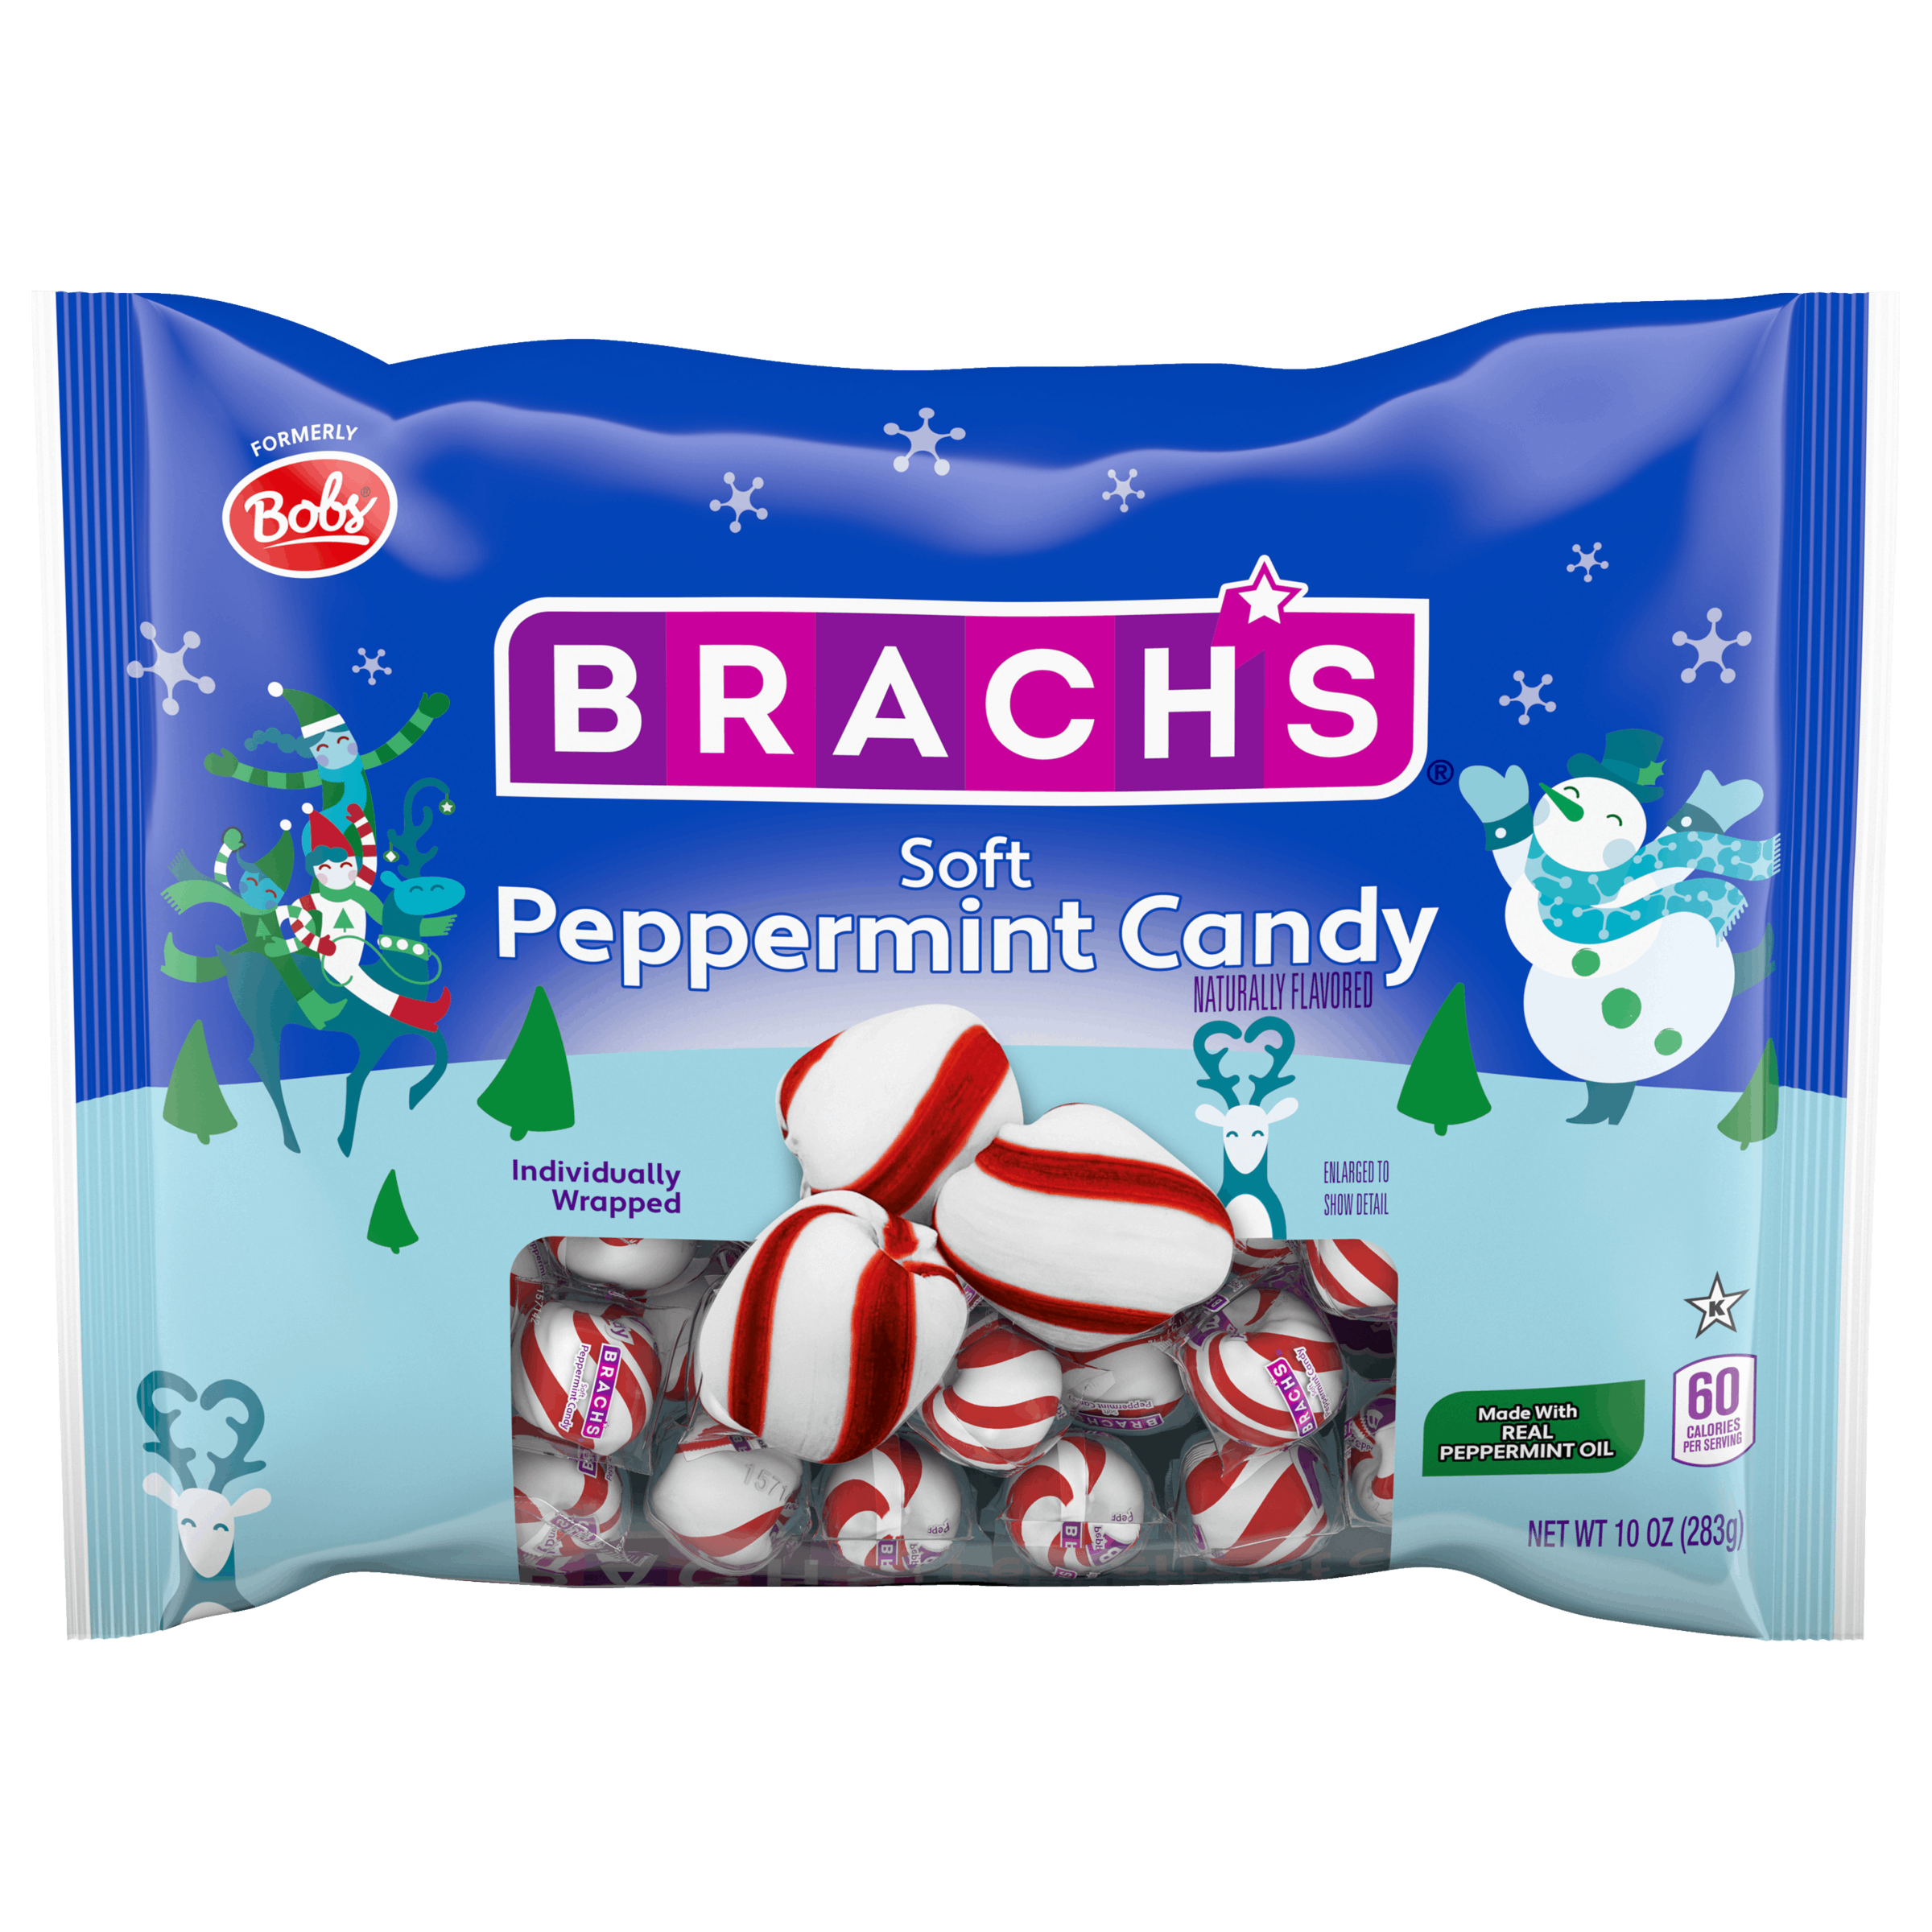 Soft Peppermint Candy